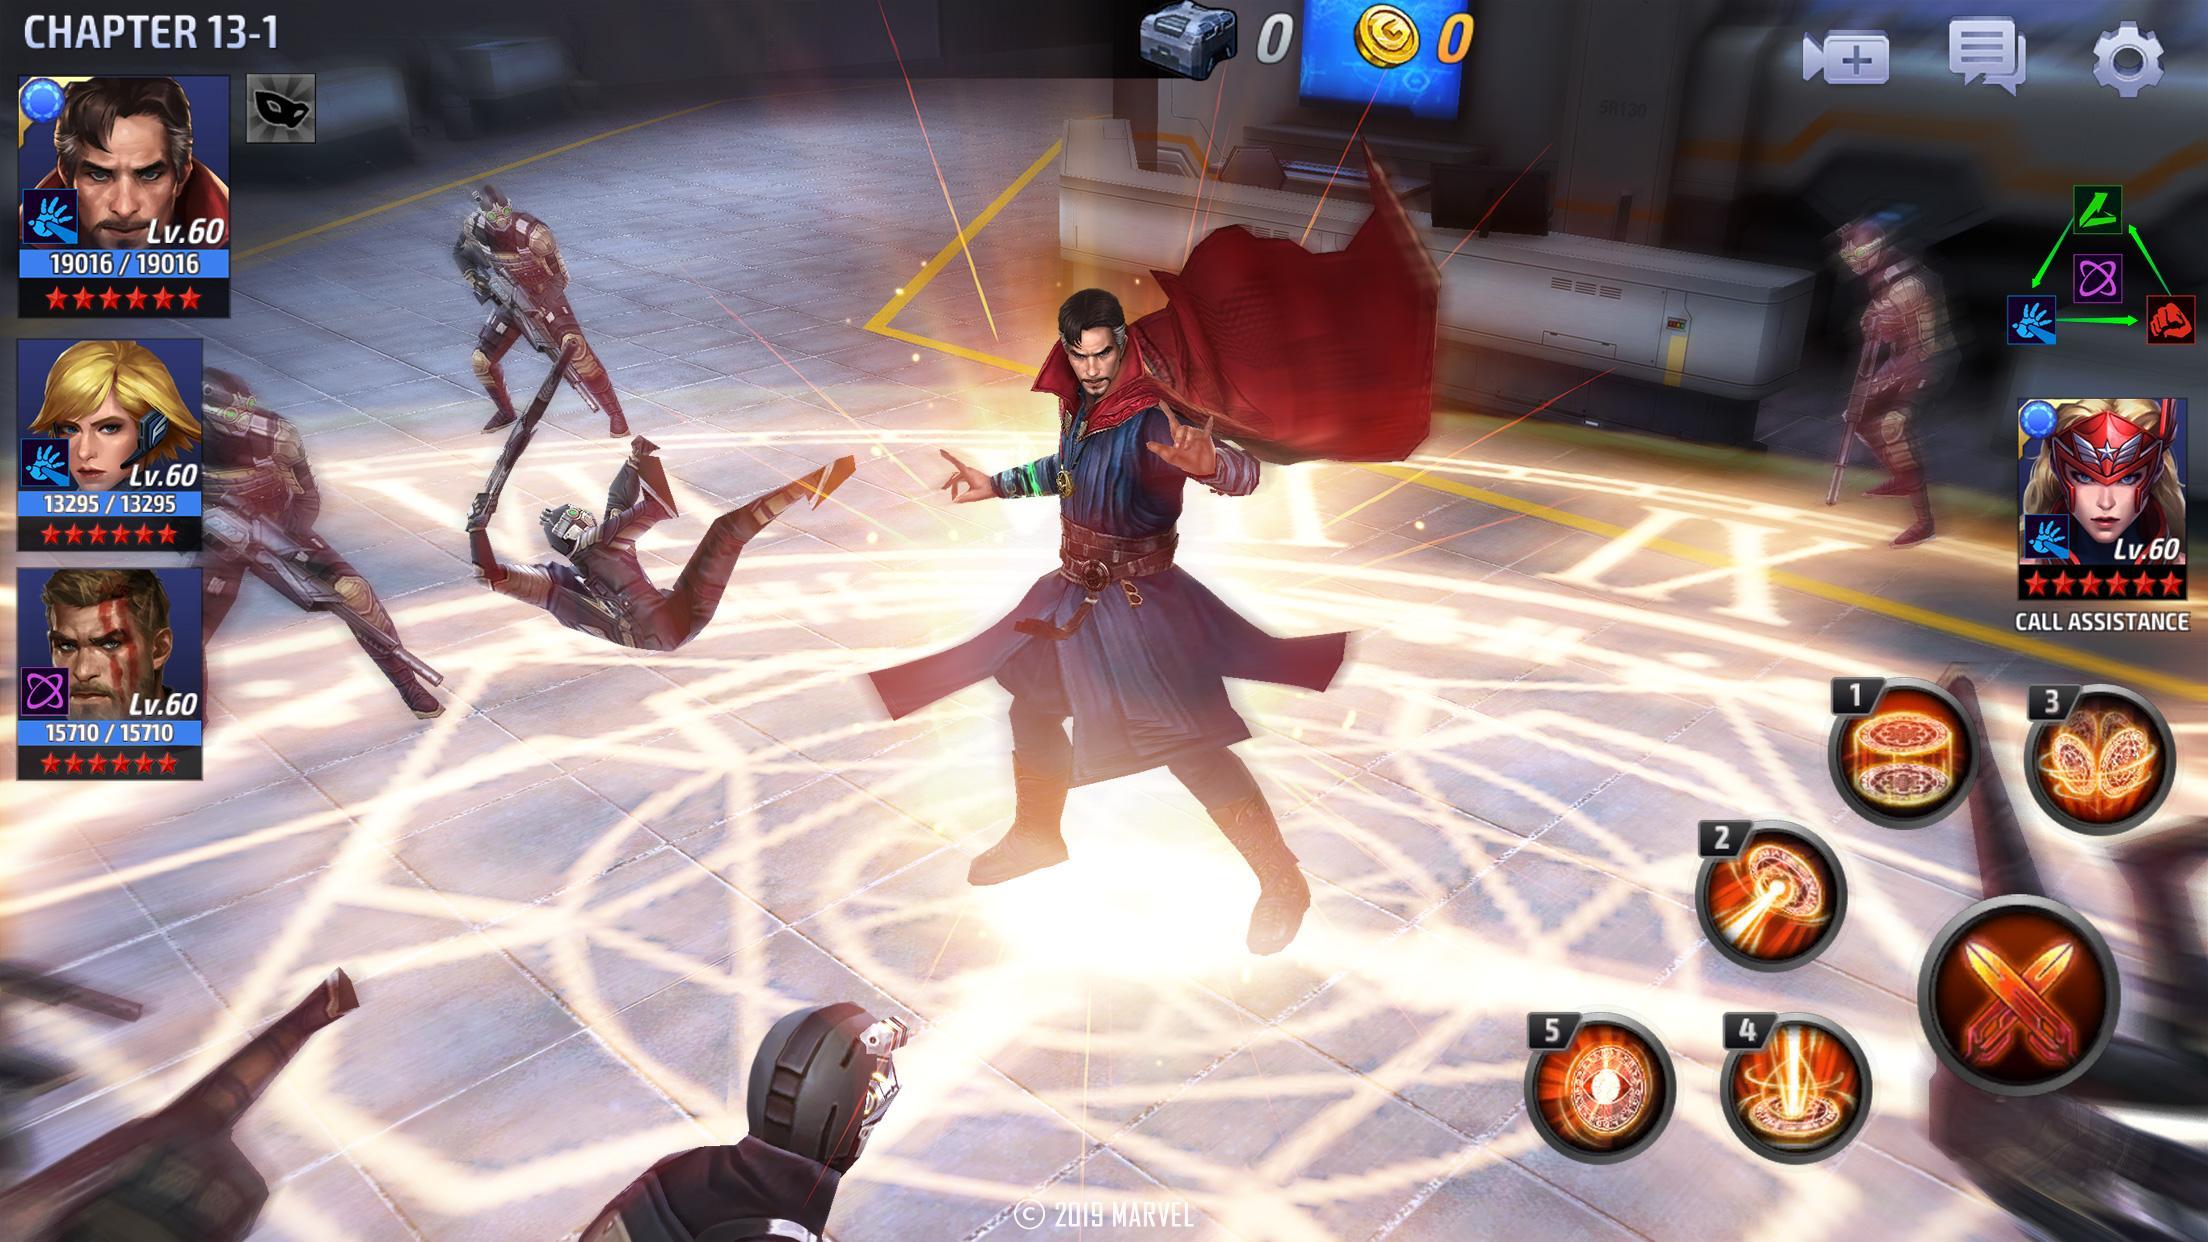 Marvel Future Fight Apk 6 8 1 Free Role Playing Game Apk Download For Android Apkpure